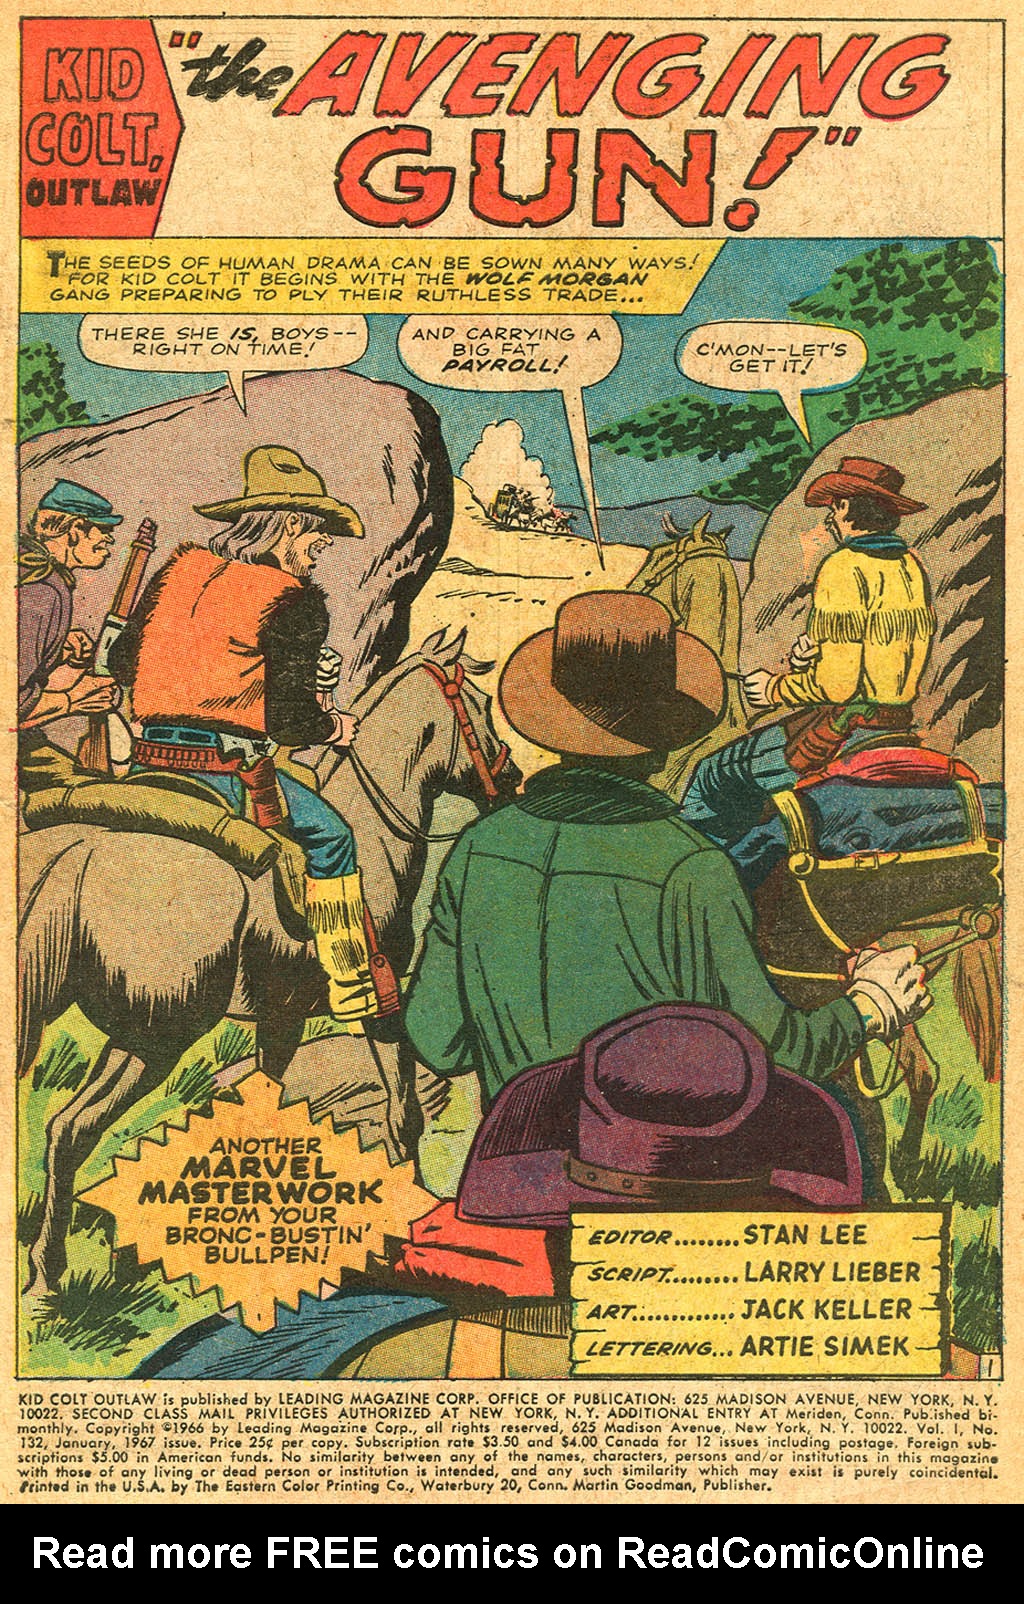 Read online Kid Colt Outlaw comic -  Issue #132 - 3